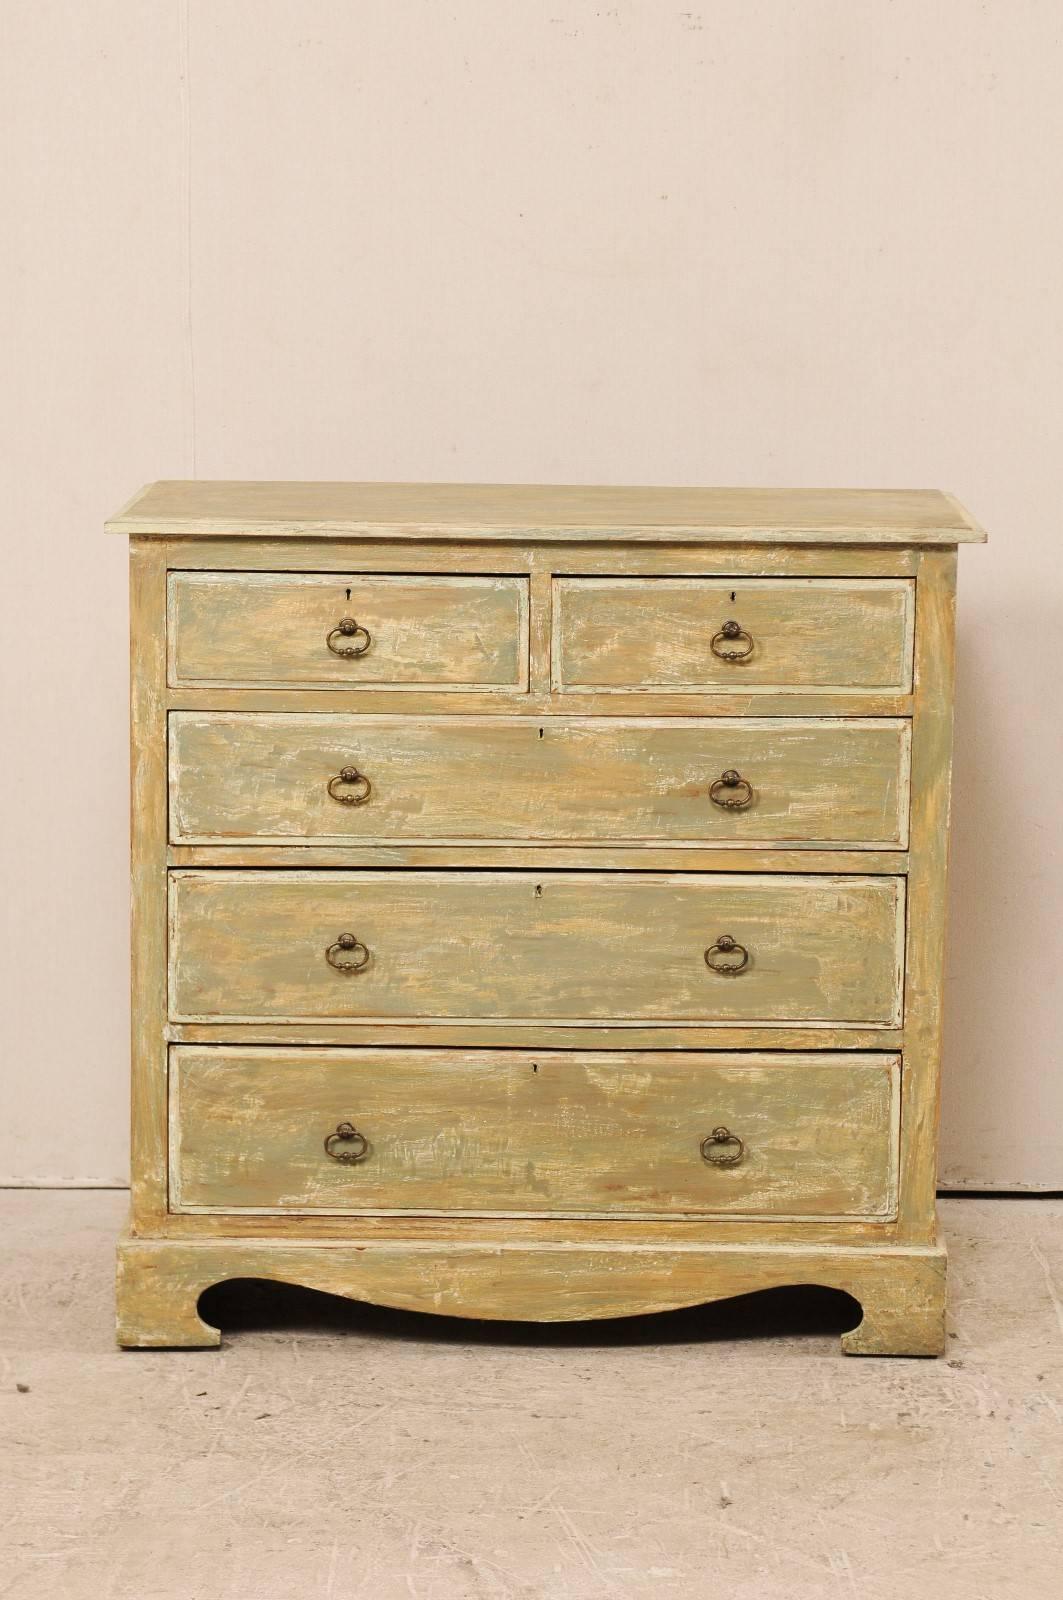 A Swedish painted wood chest from the early 20th century. This antique Swedish chest features two half-length drawers over three graduated full length drawers. This chest is minimally adorn with oval ring pulls and a swag carved skirt. This chest